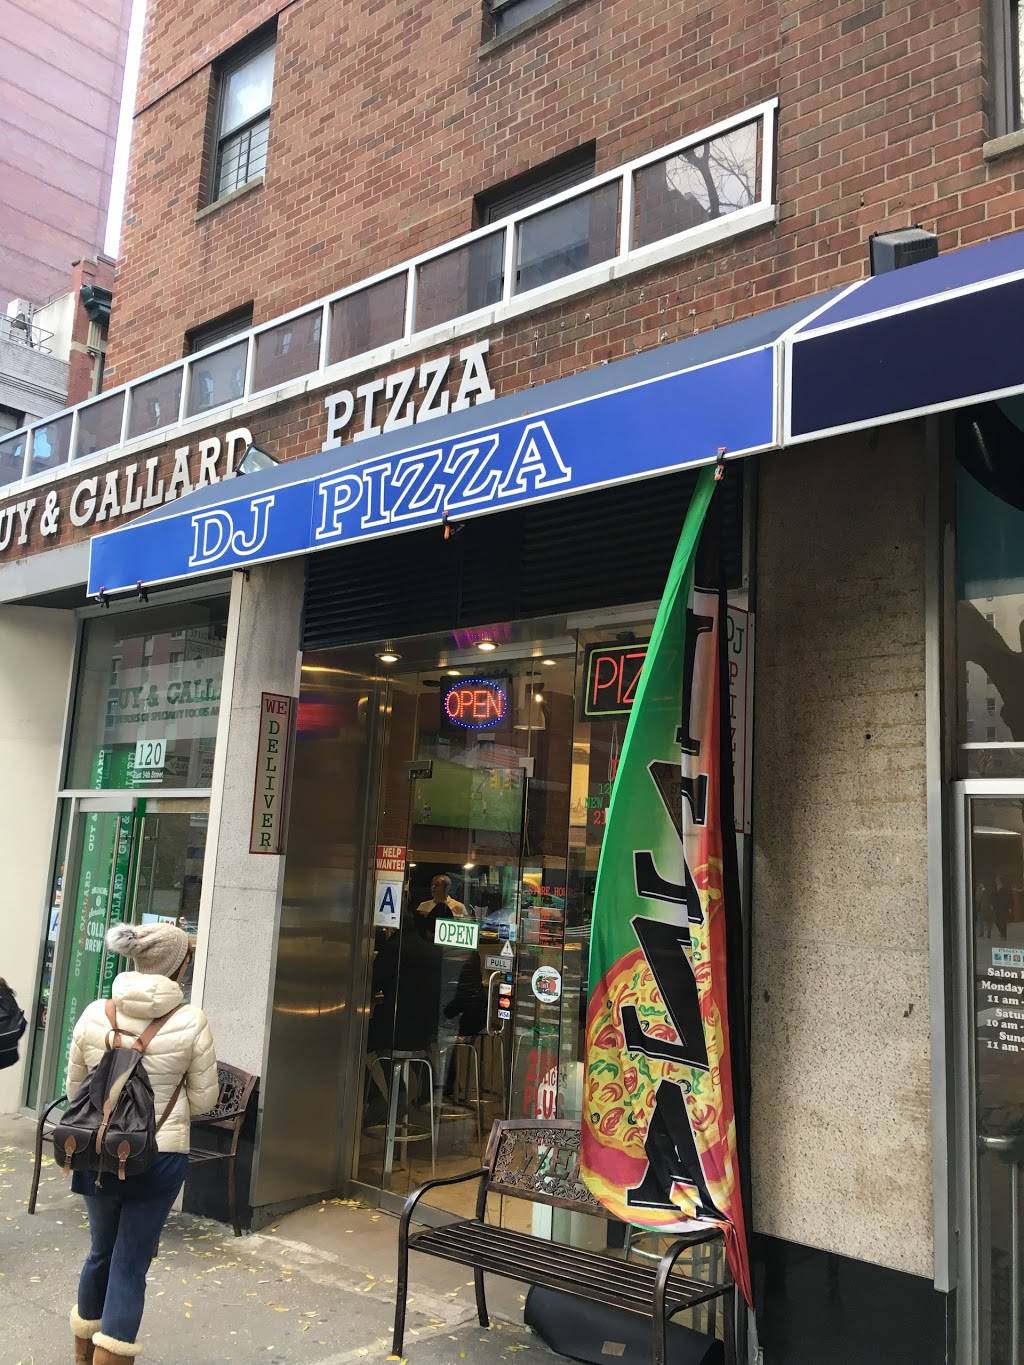 Dj pizza | meal takeaway | 120 E 34th St, New York, NY 10016, USA | 2129517075 OR +1 212-951-7075